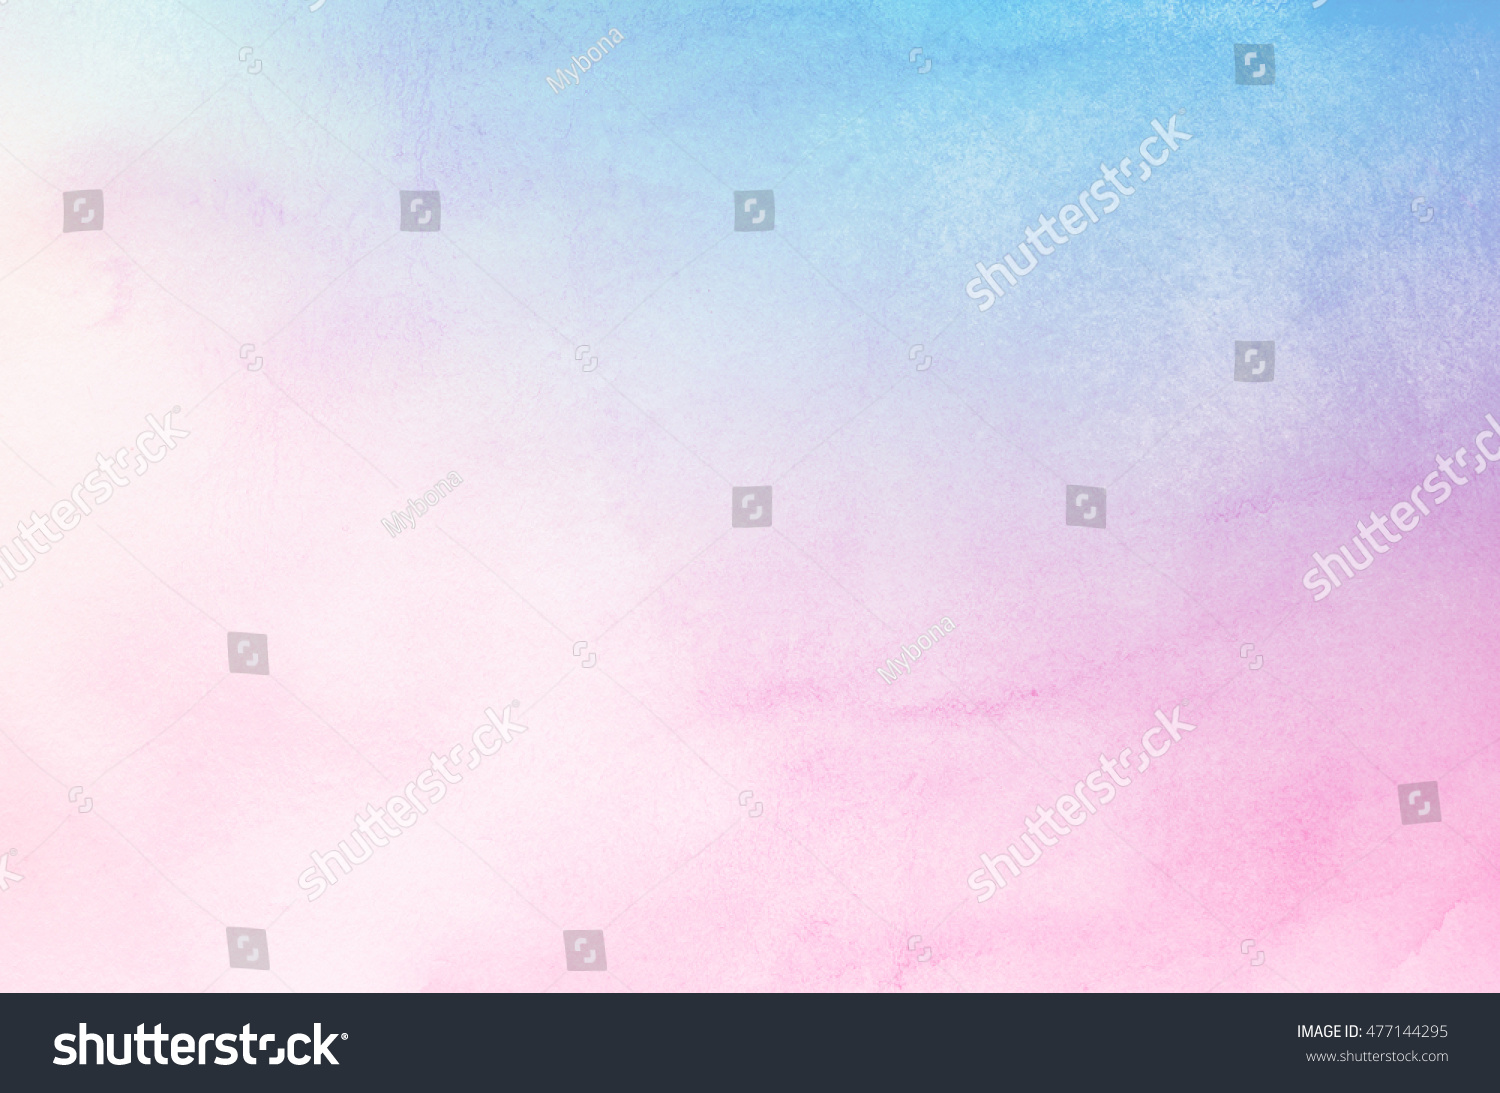 Abstract pastel watercolor background - Blue sky and pink pastel watercolor painted on paper #477144295